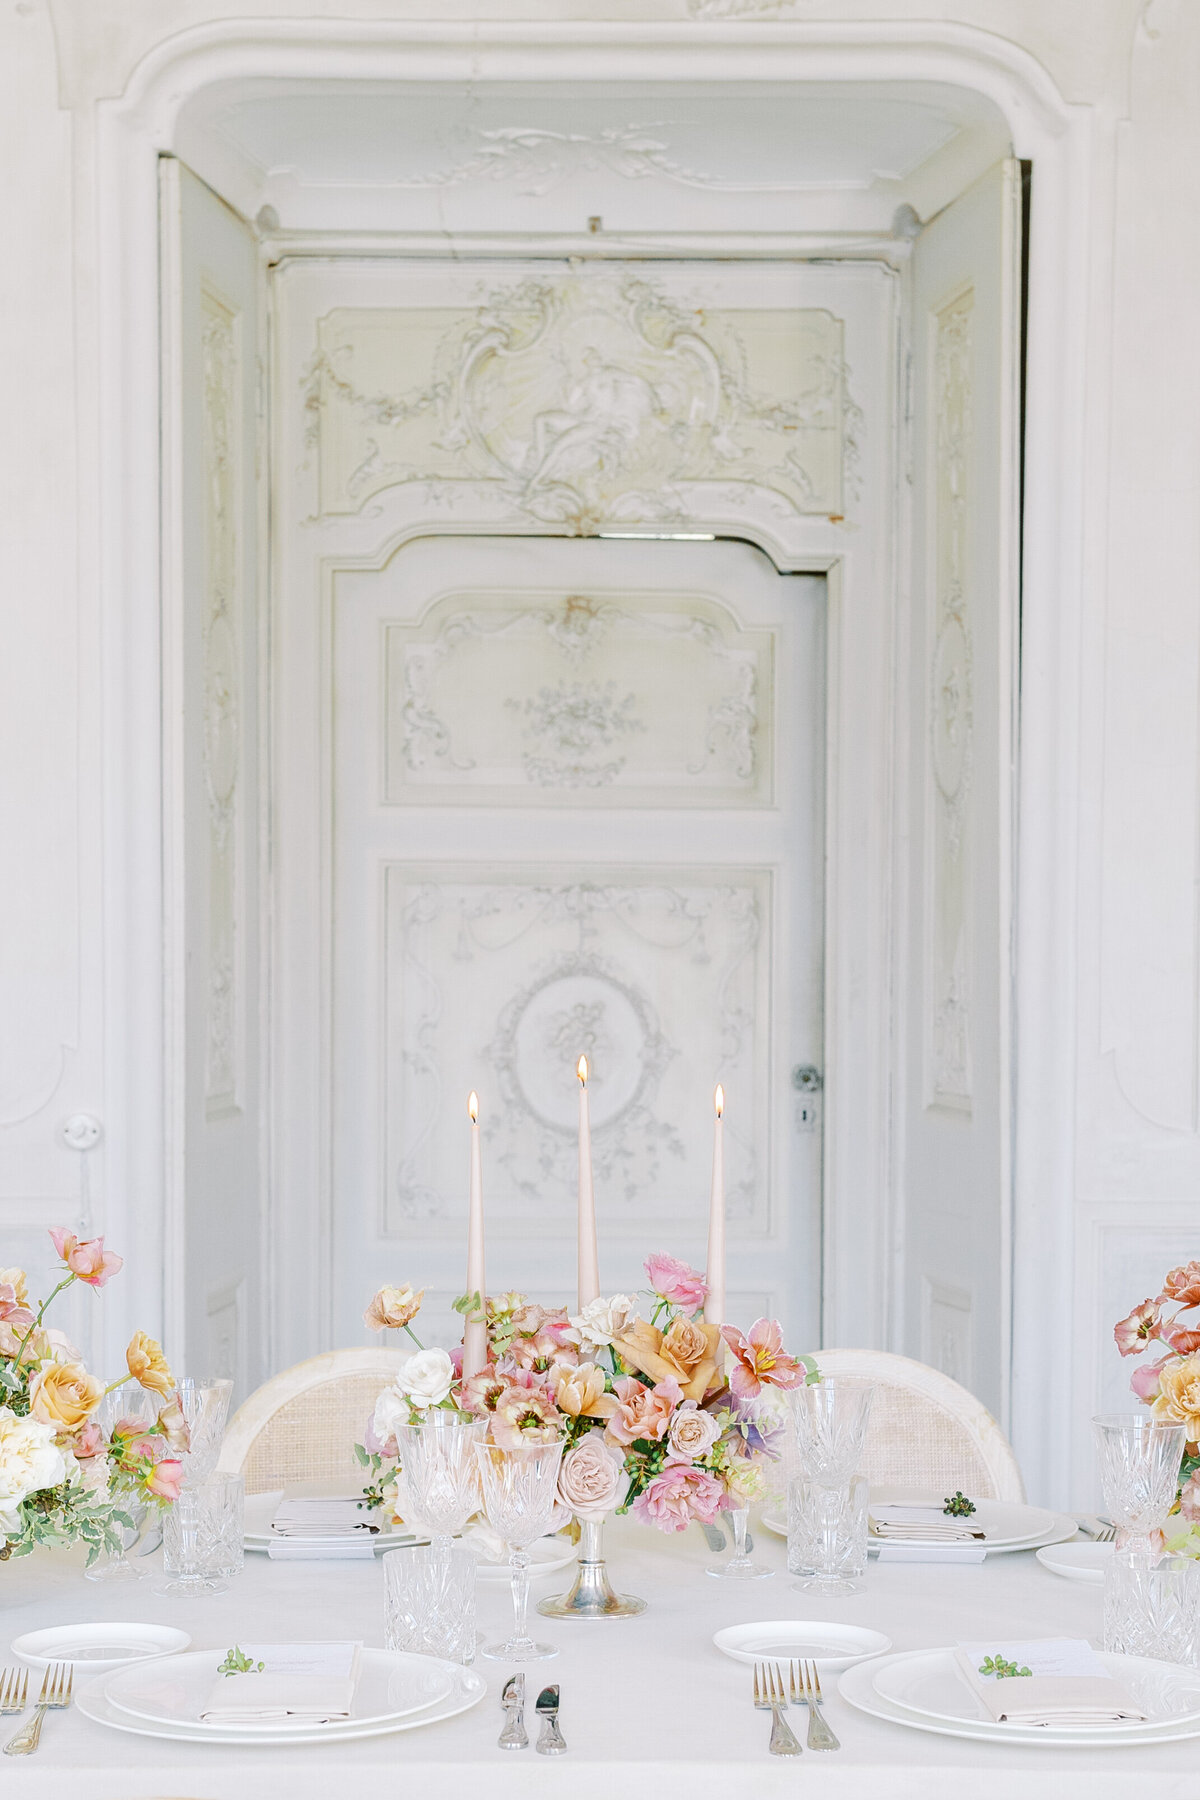 Wedding at Villa Sola Cabiati stucco room with colorful flowers and candles photographed by Italy Wedding photographer